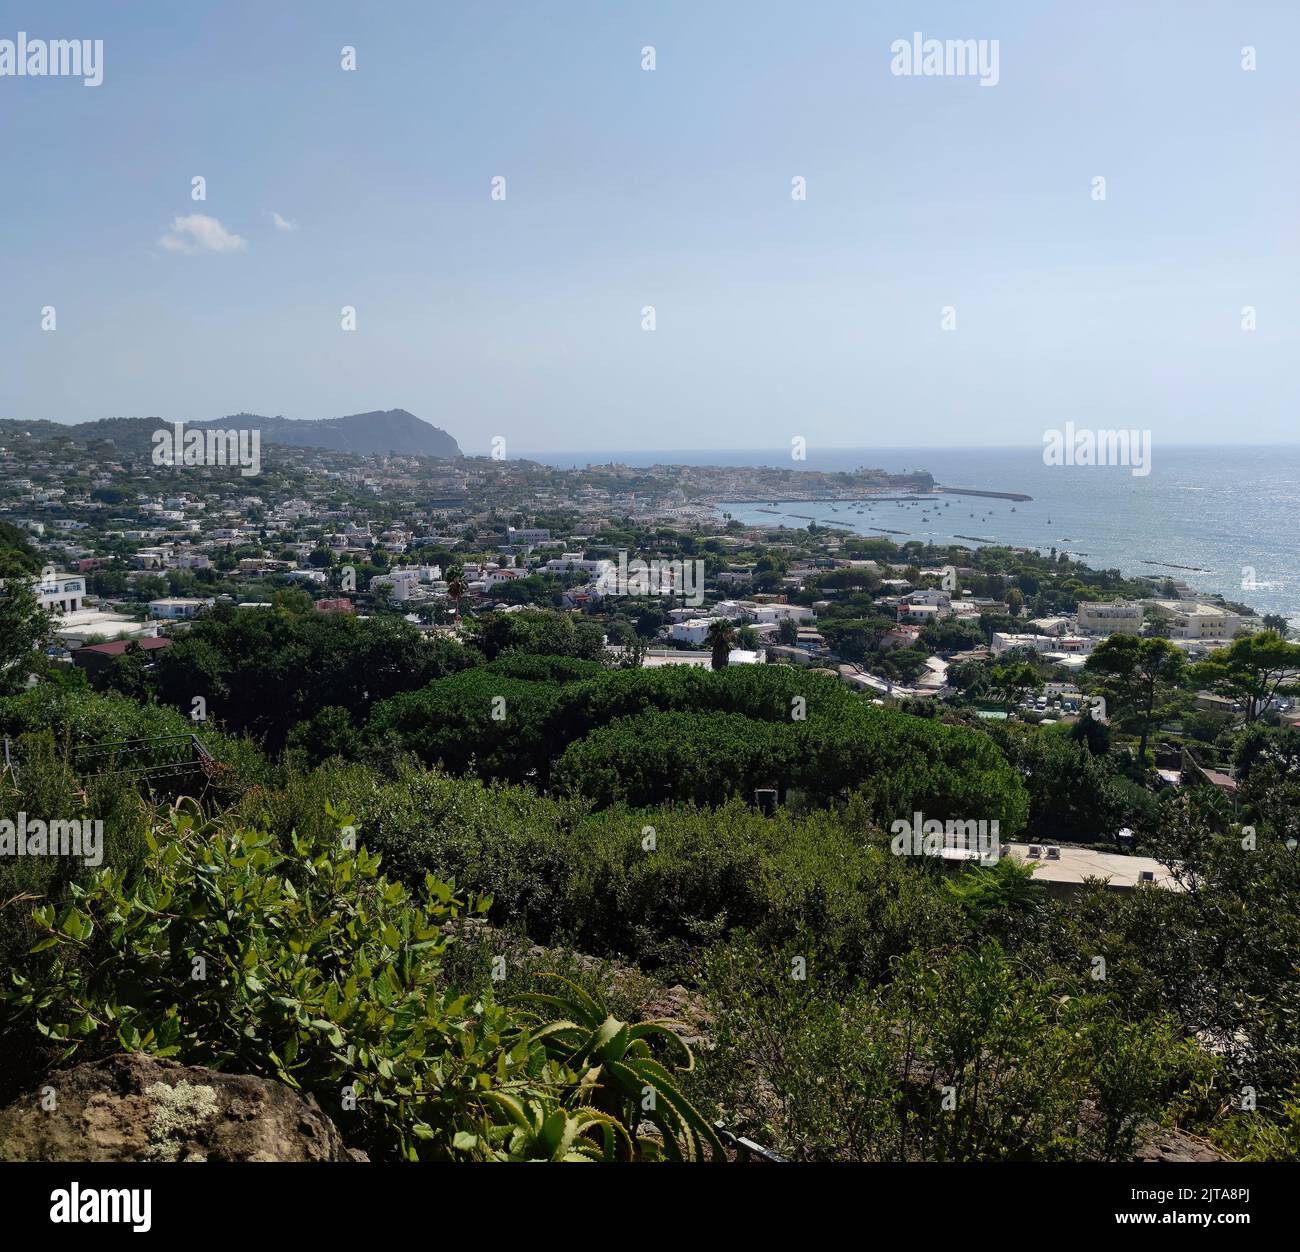 Panoramic view of the beautiful city of Forio from the garden of Mortella one of the most beautiful gardens in Italy. Isola d' Ischia, Italy Stock Photo